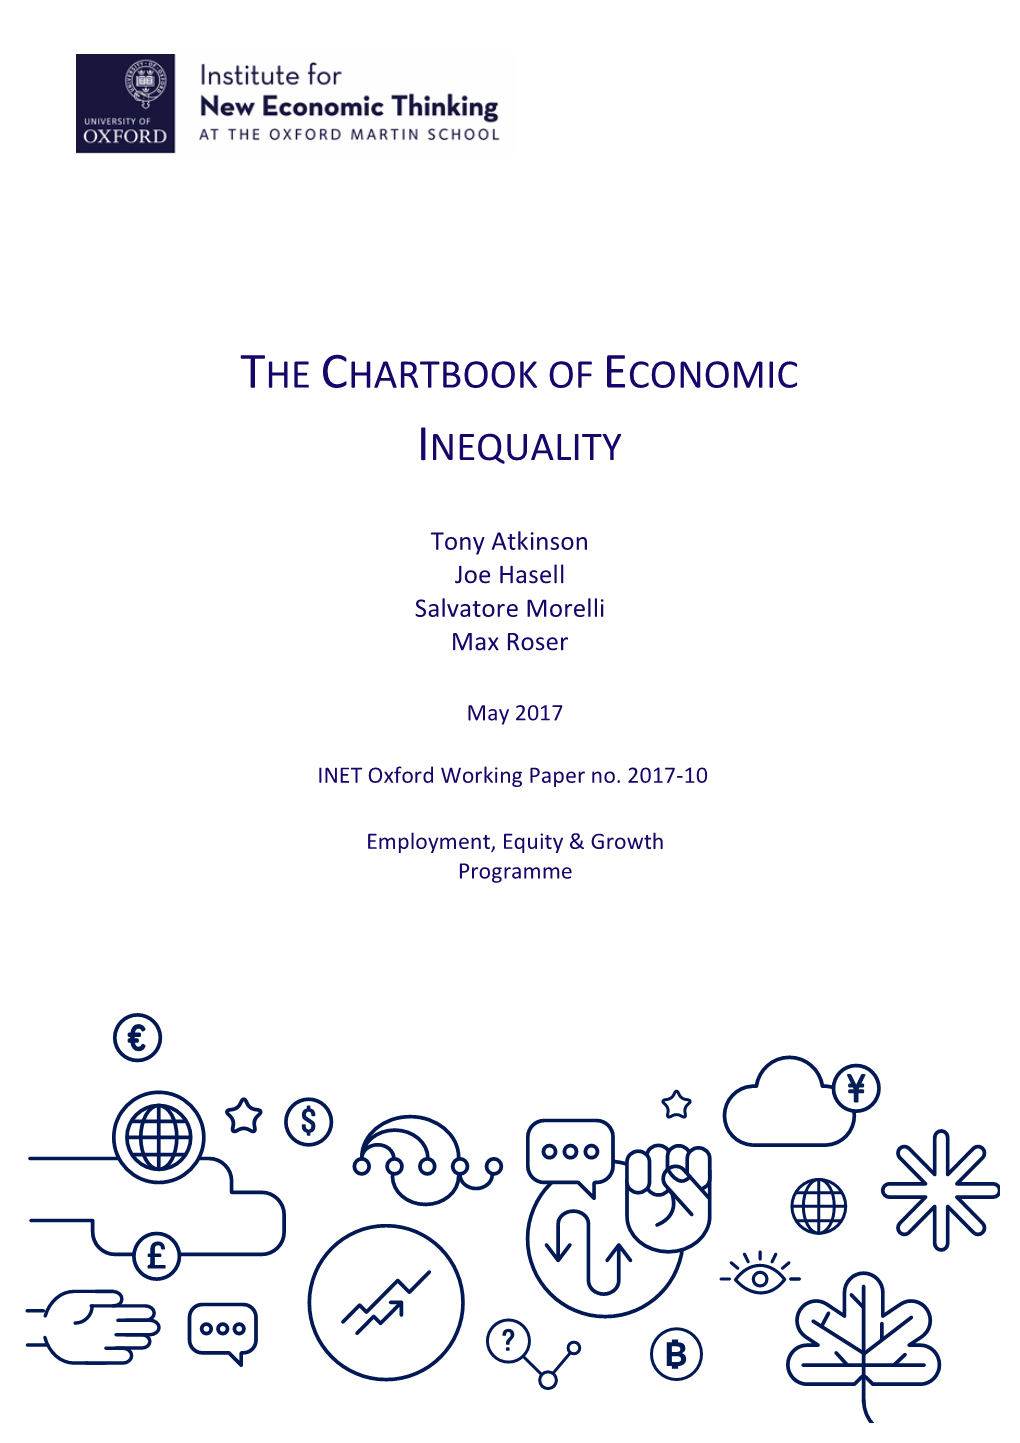 The Chartbook of Economic Inequality Tony Atkinson, Joe Hasell, Salvatore Morelli, and Max Roser 2017 the Chartbook of Economic Inequality1